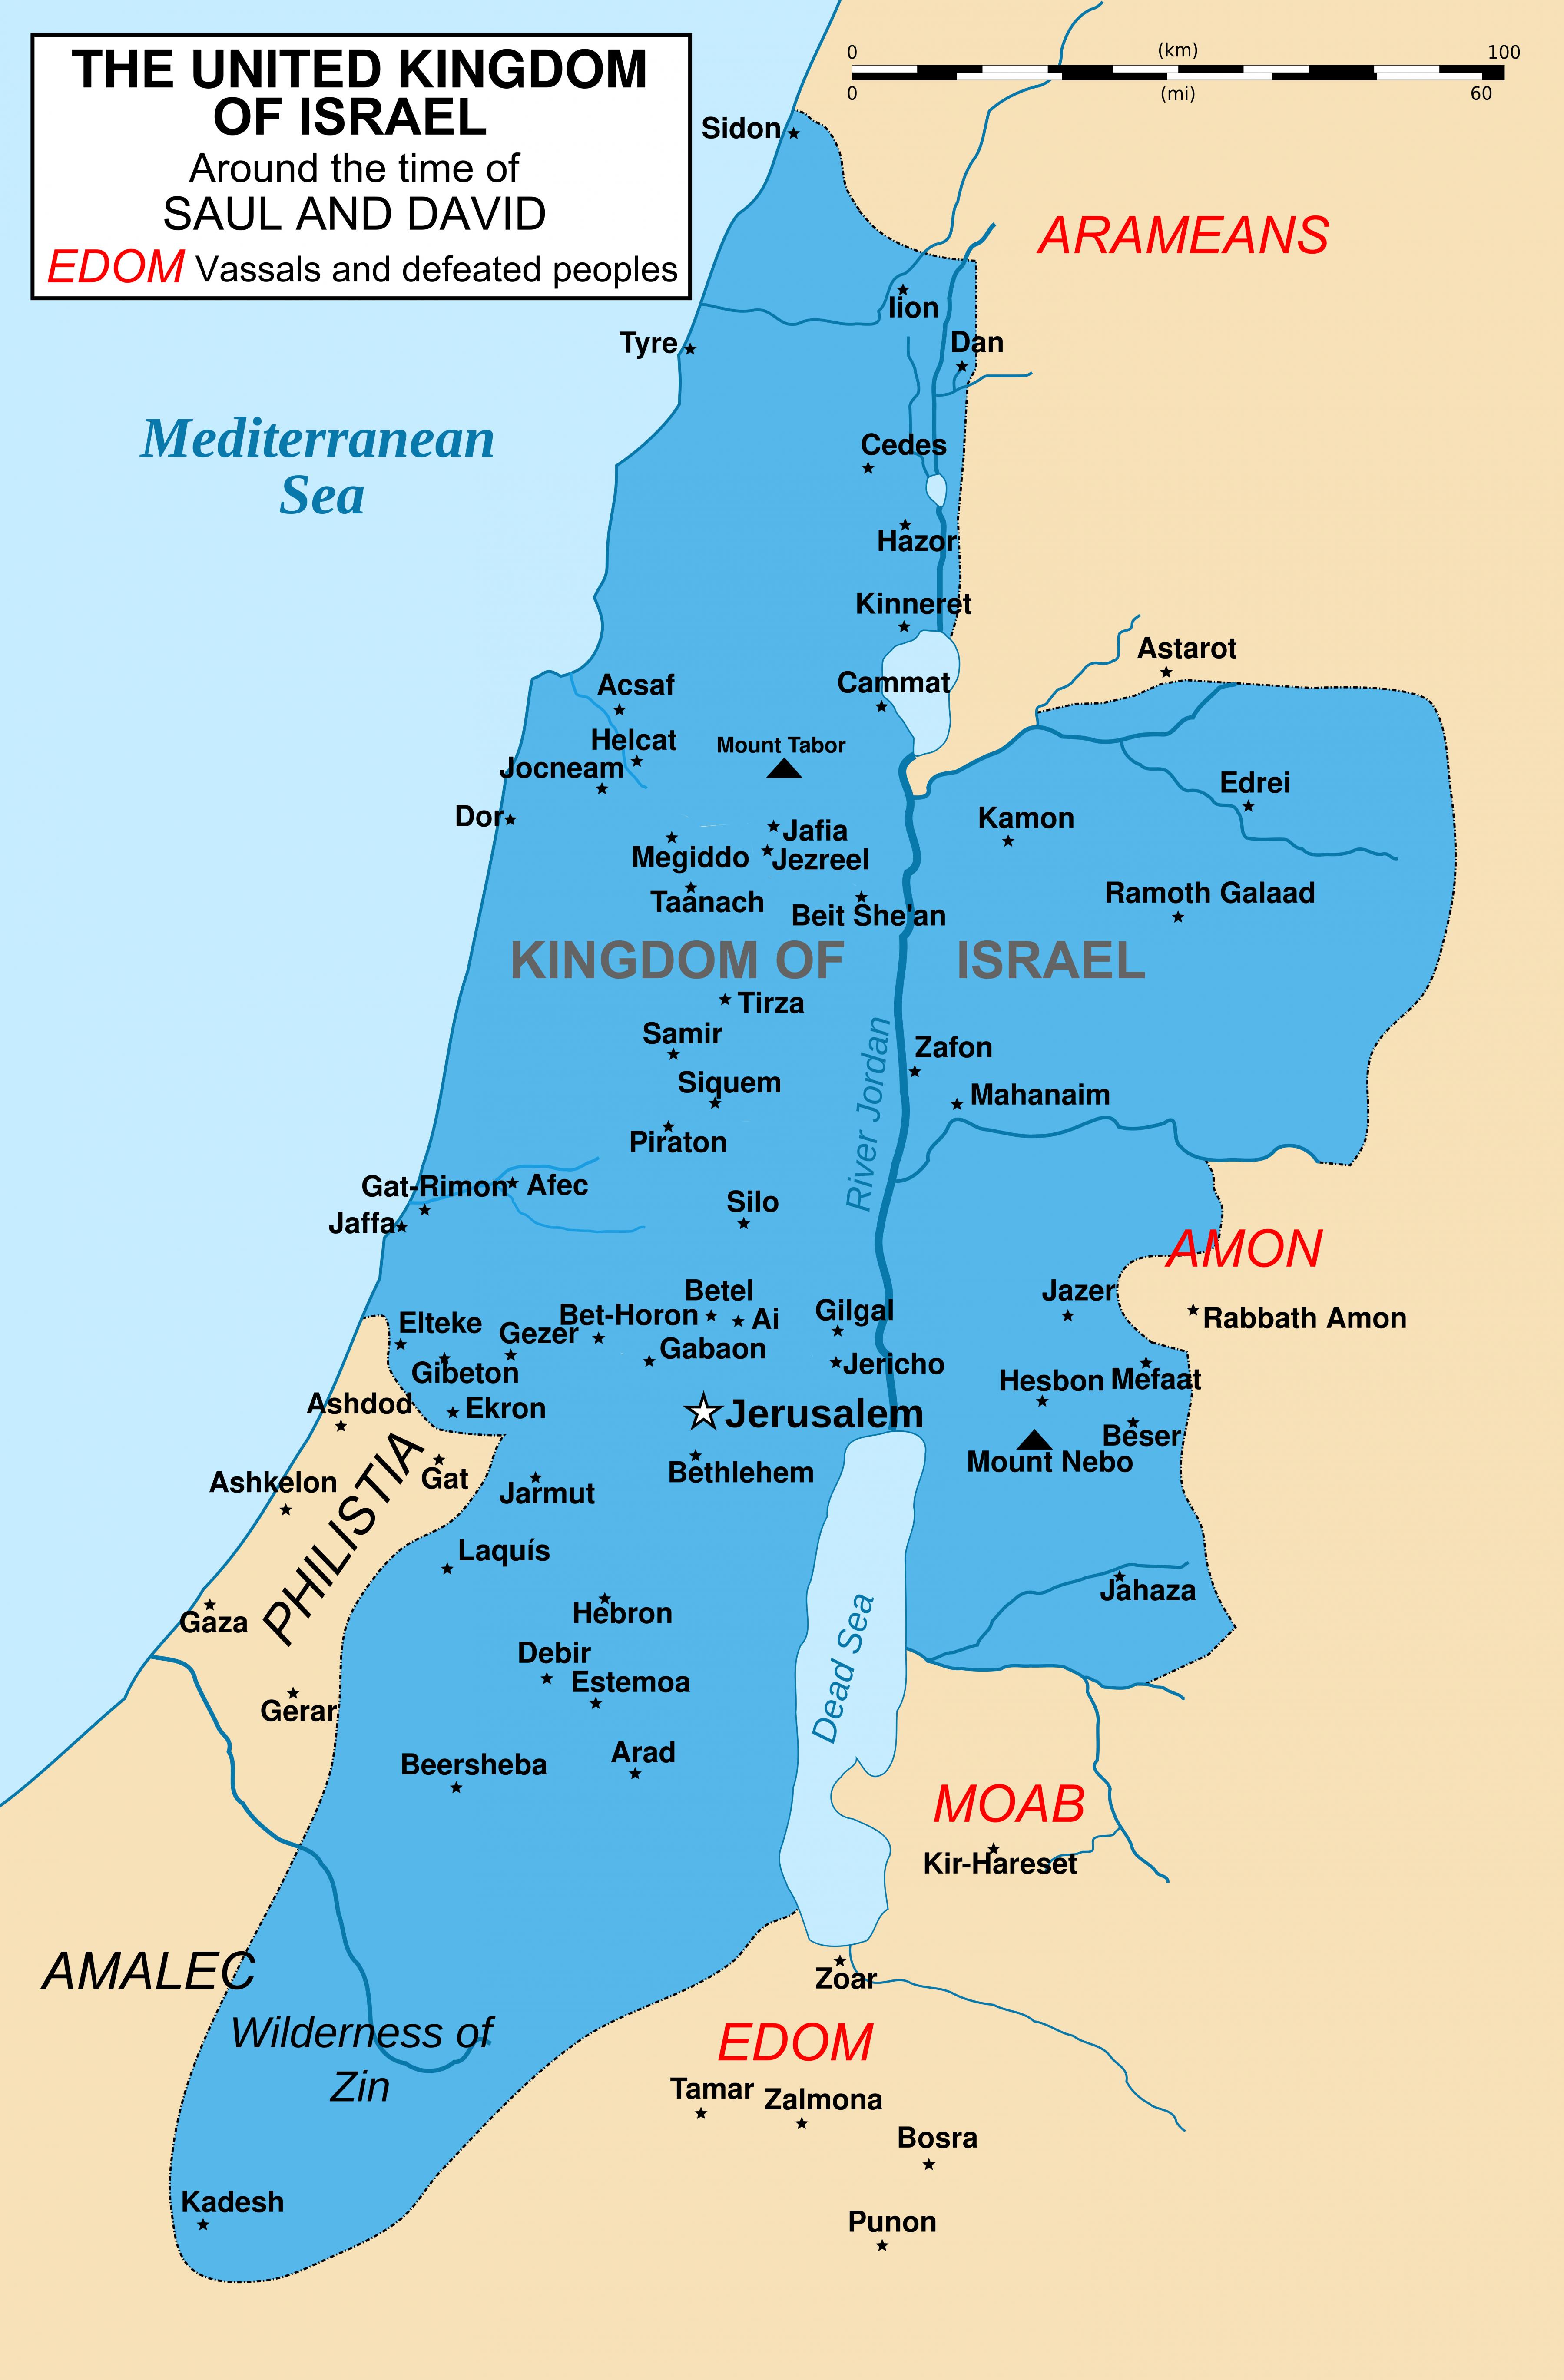 old-map-of-israel-ancient-and-historical-map-of-israel